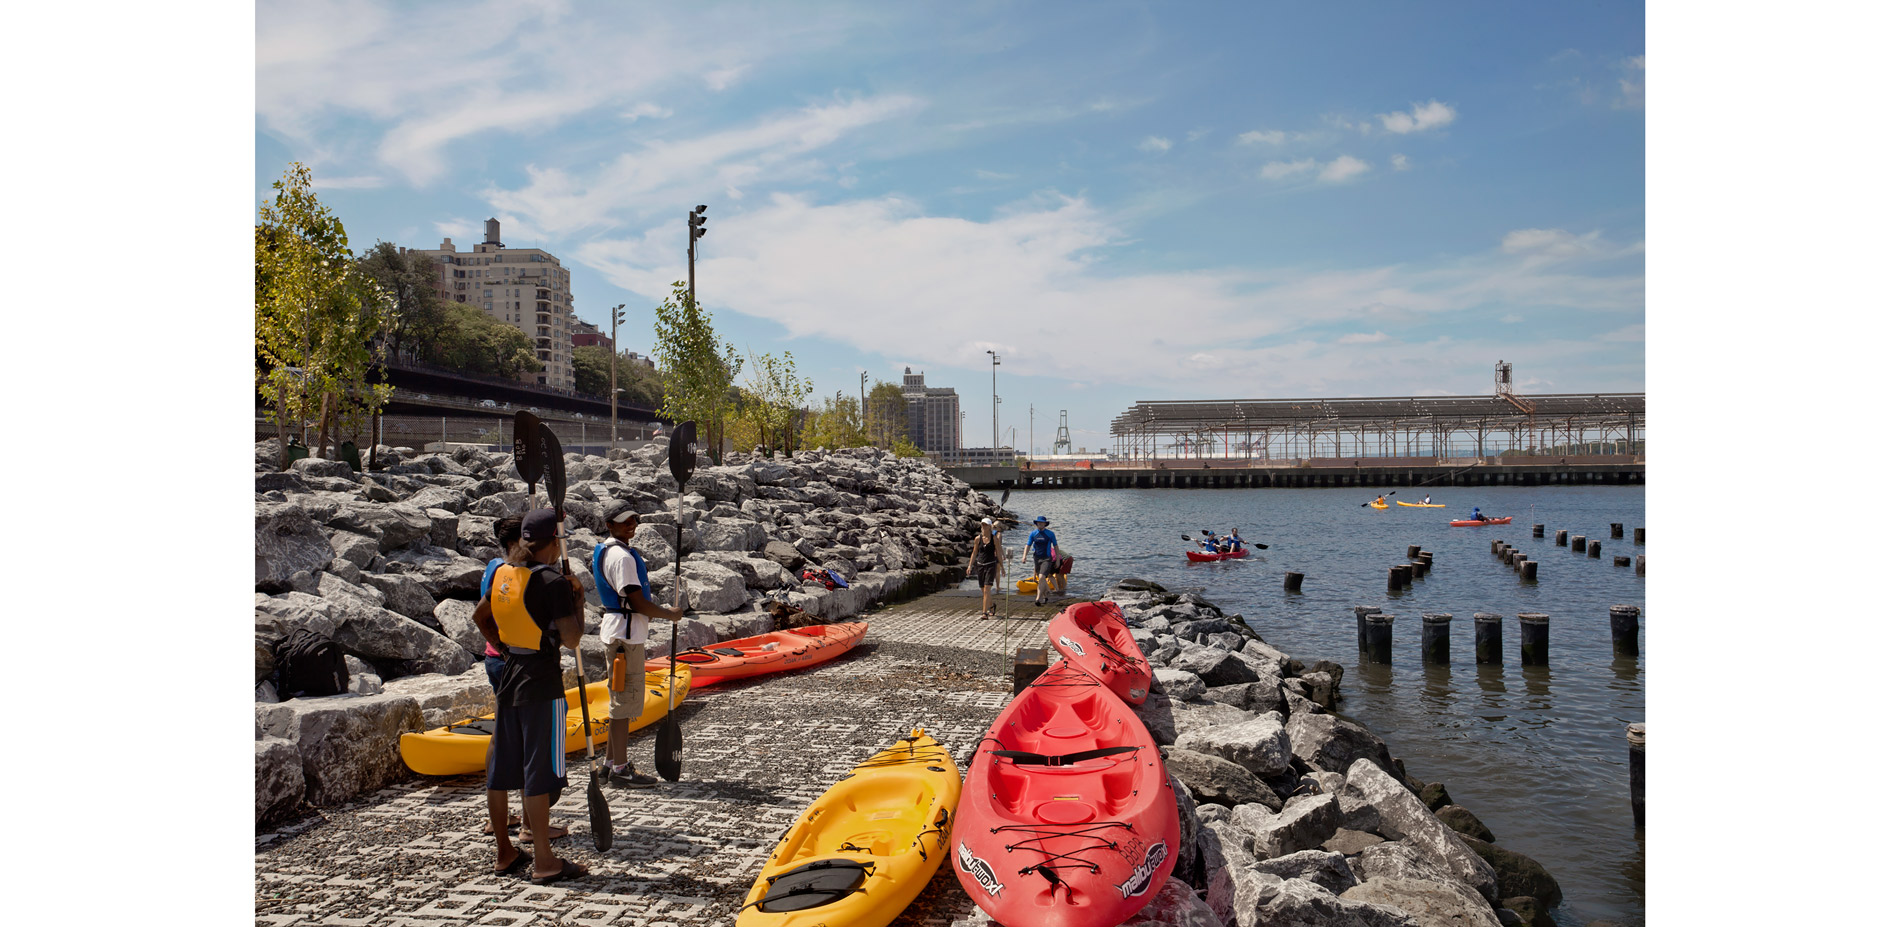 Kayaking has become a major pastime in New York, as waterways like the East River have become cleaner and safer. Riprap armoring allows tides and stor…